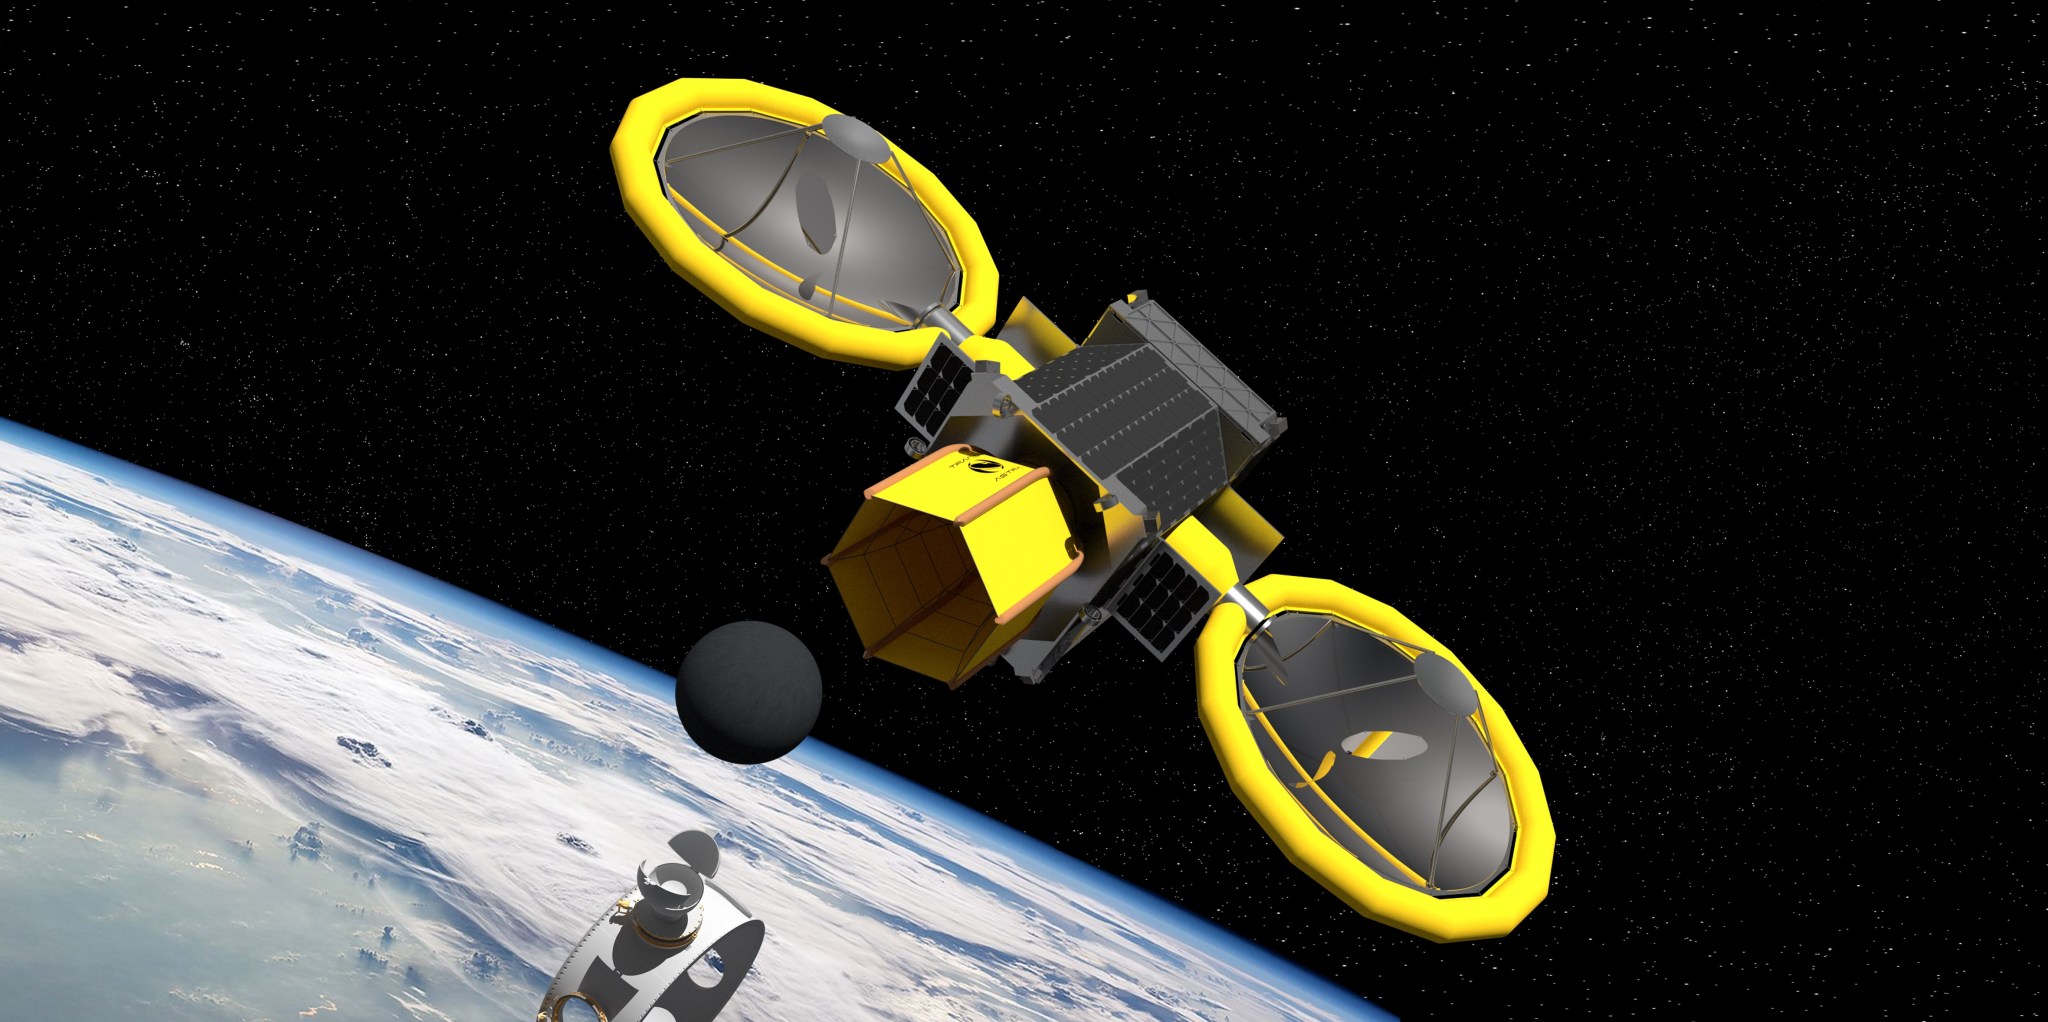 Illustration of the Mini Bee mission concept, a 2019 NIAC Phase III.